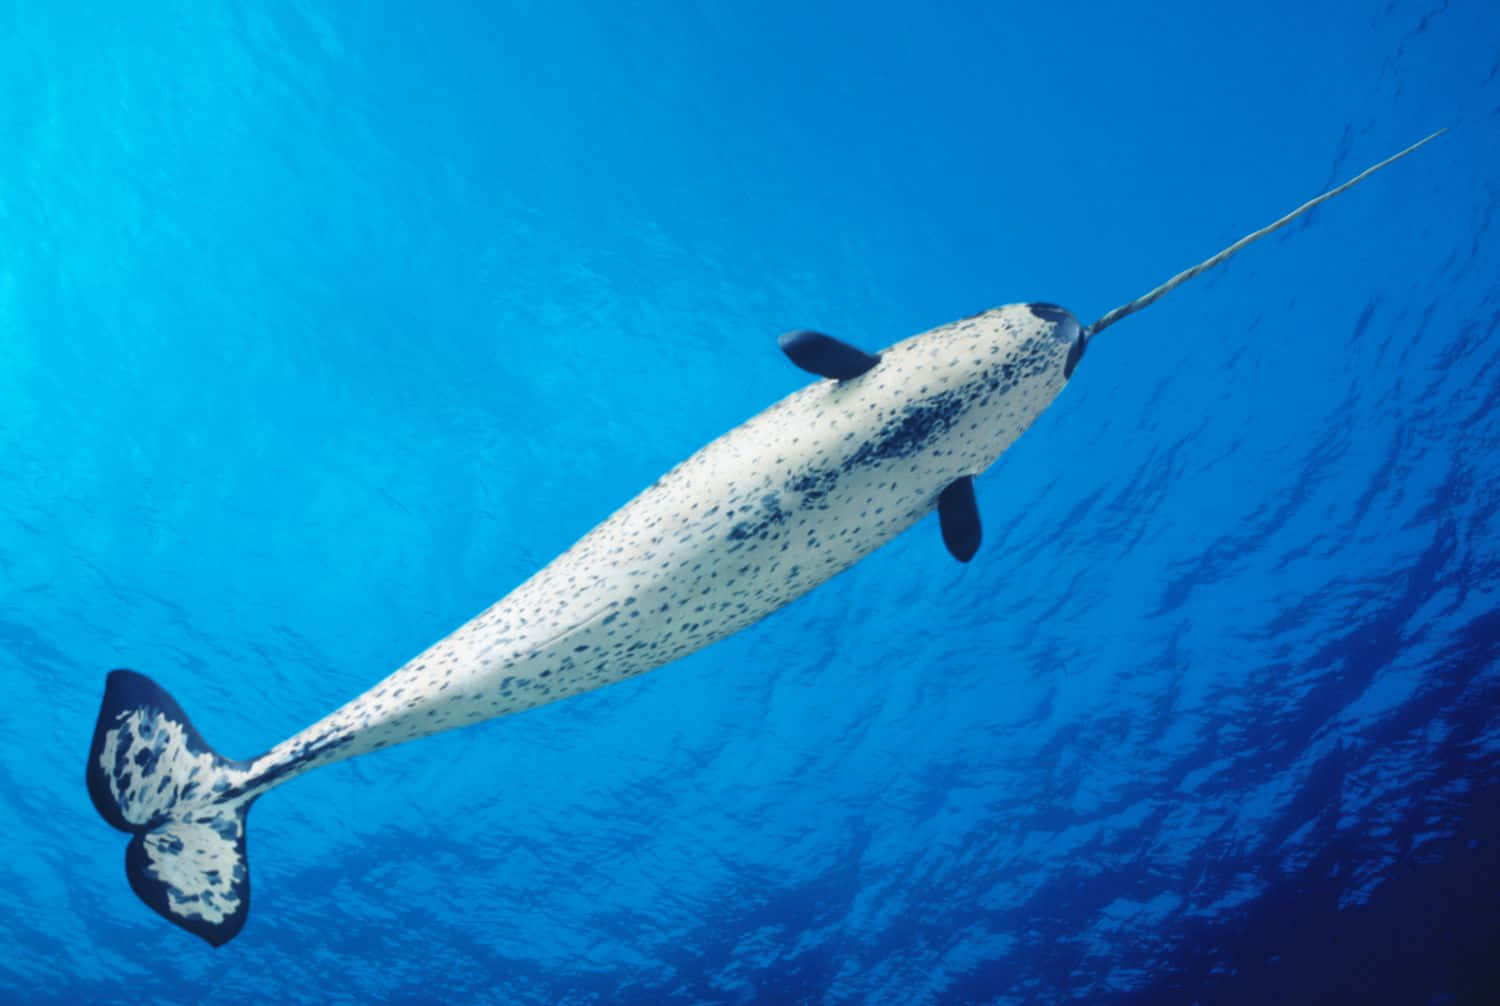 A beautiful narwhal swims beneath the icy arctic waters.